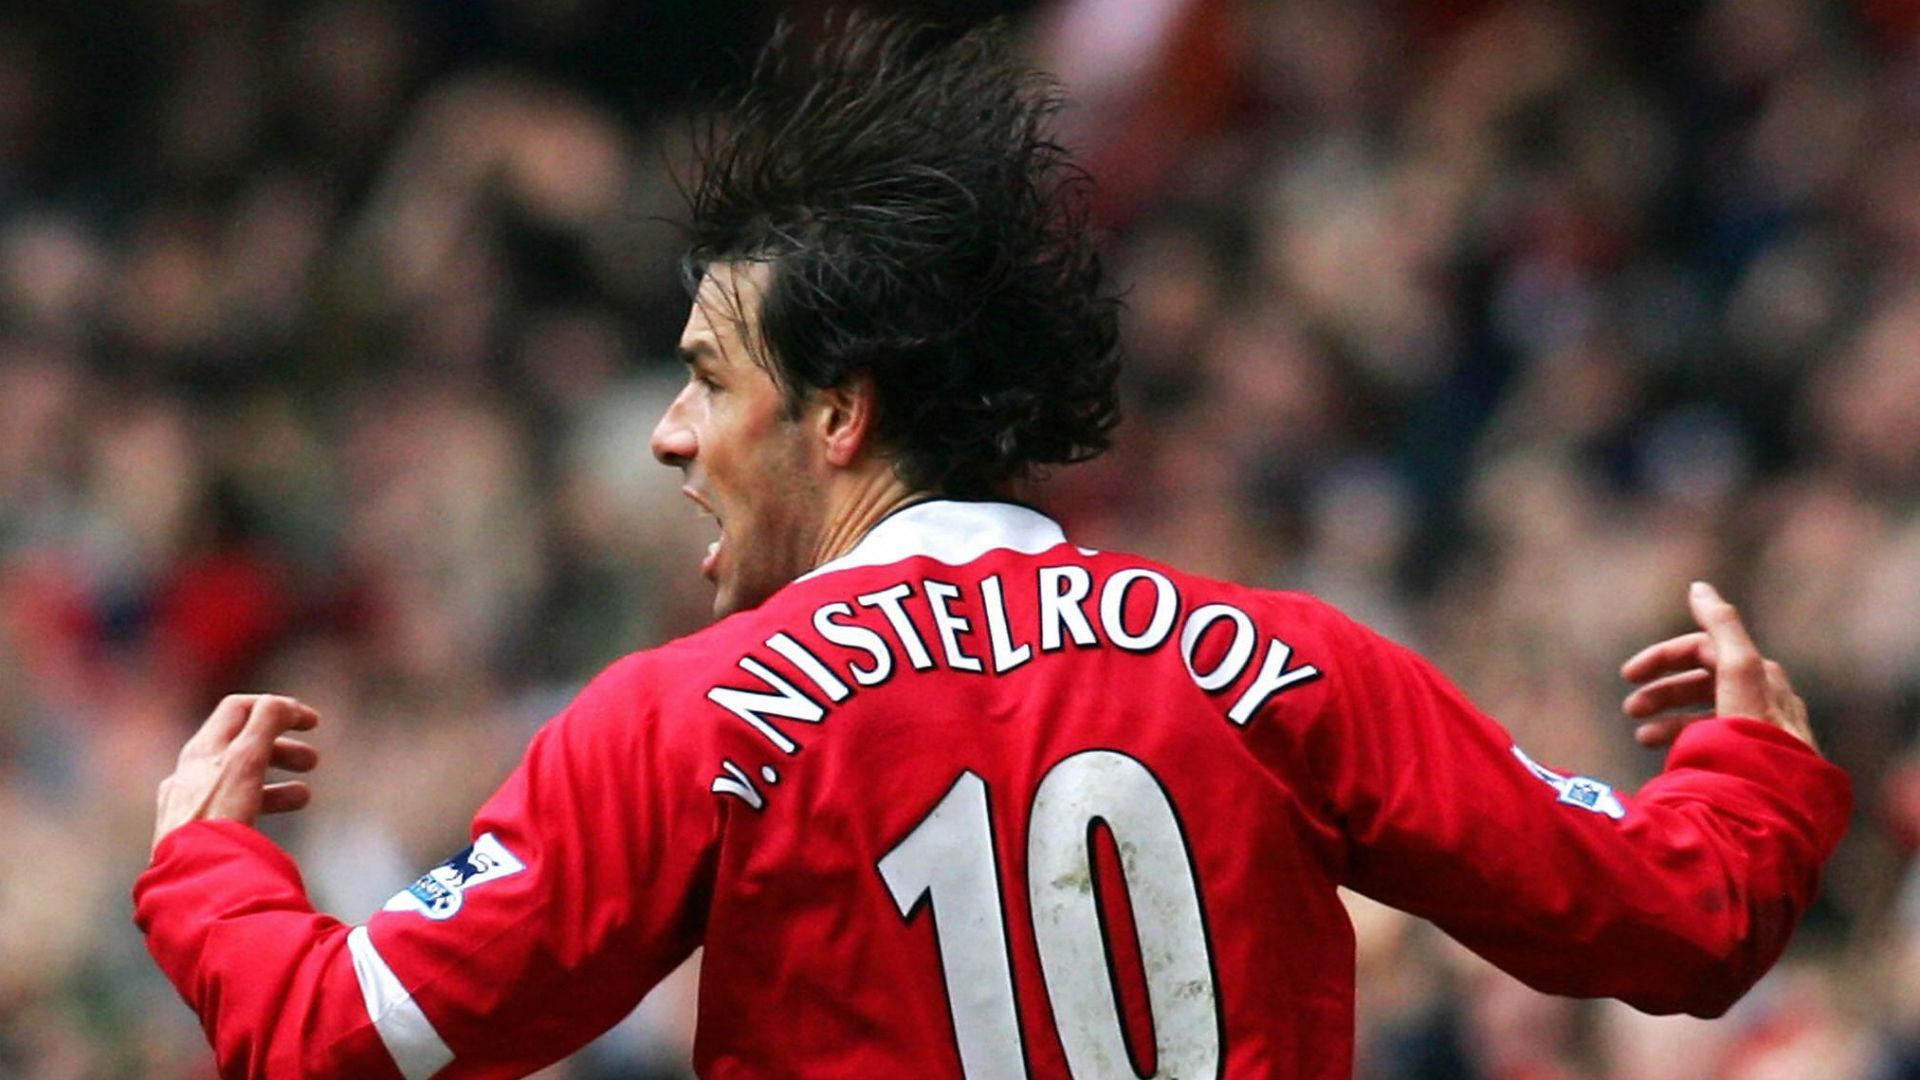 Ruud Van Nistelrooy: Manchester United's “Best Finisher, Ever